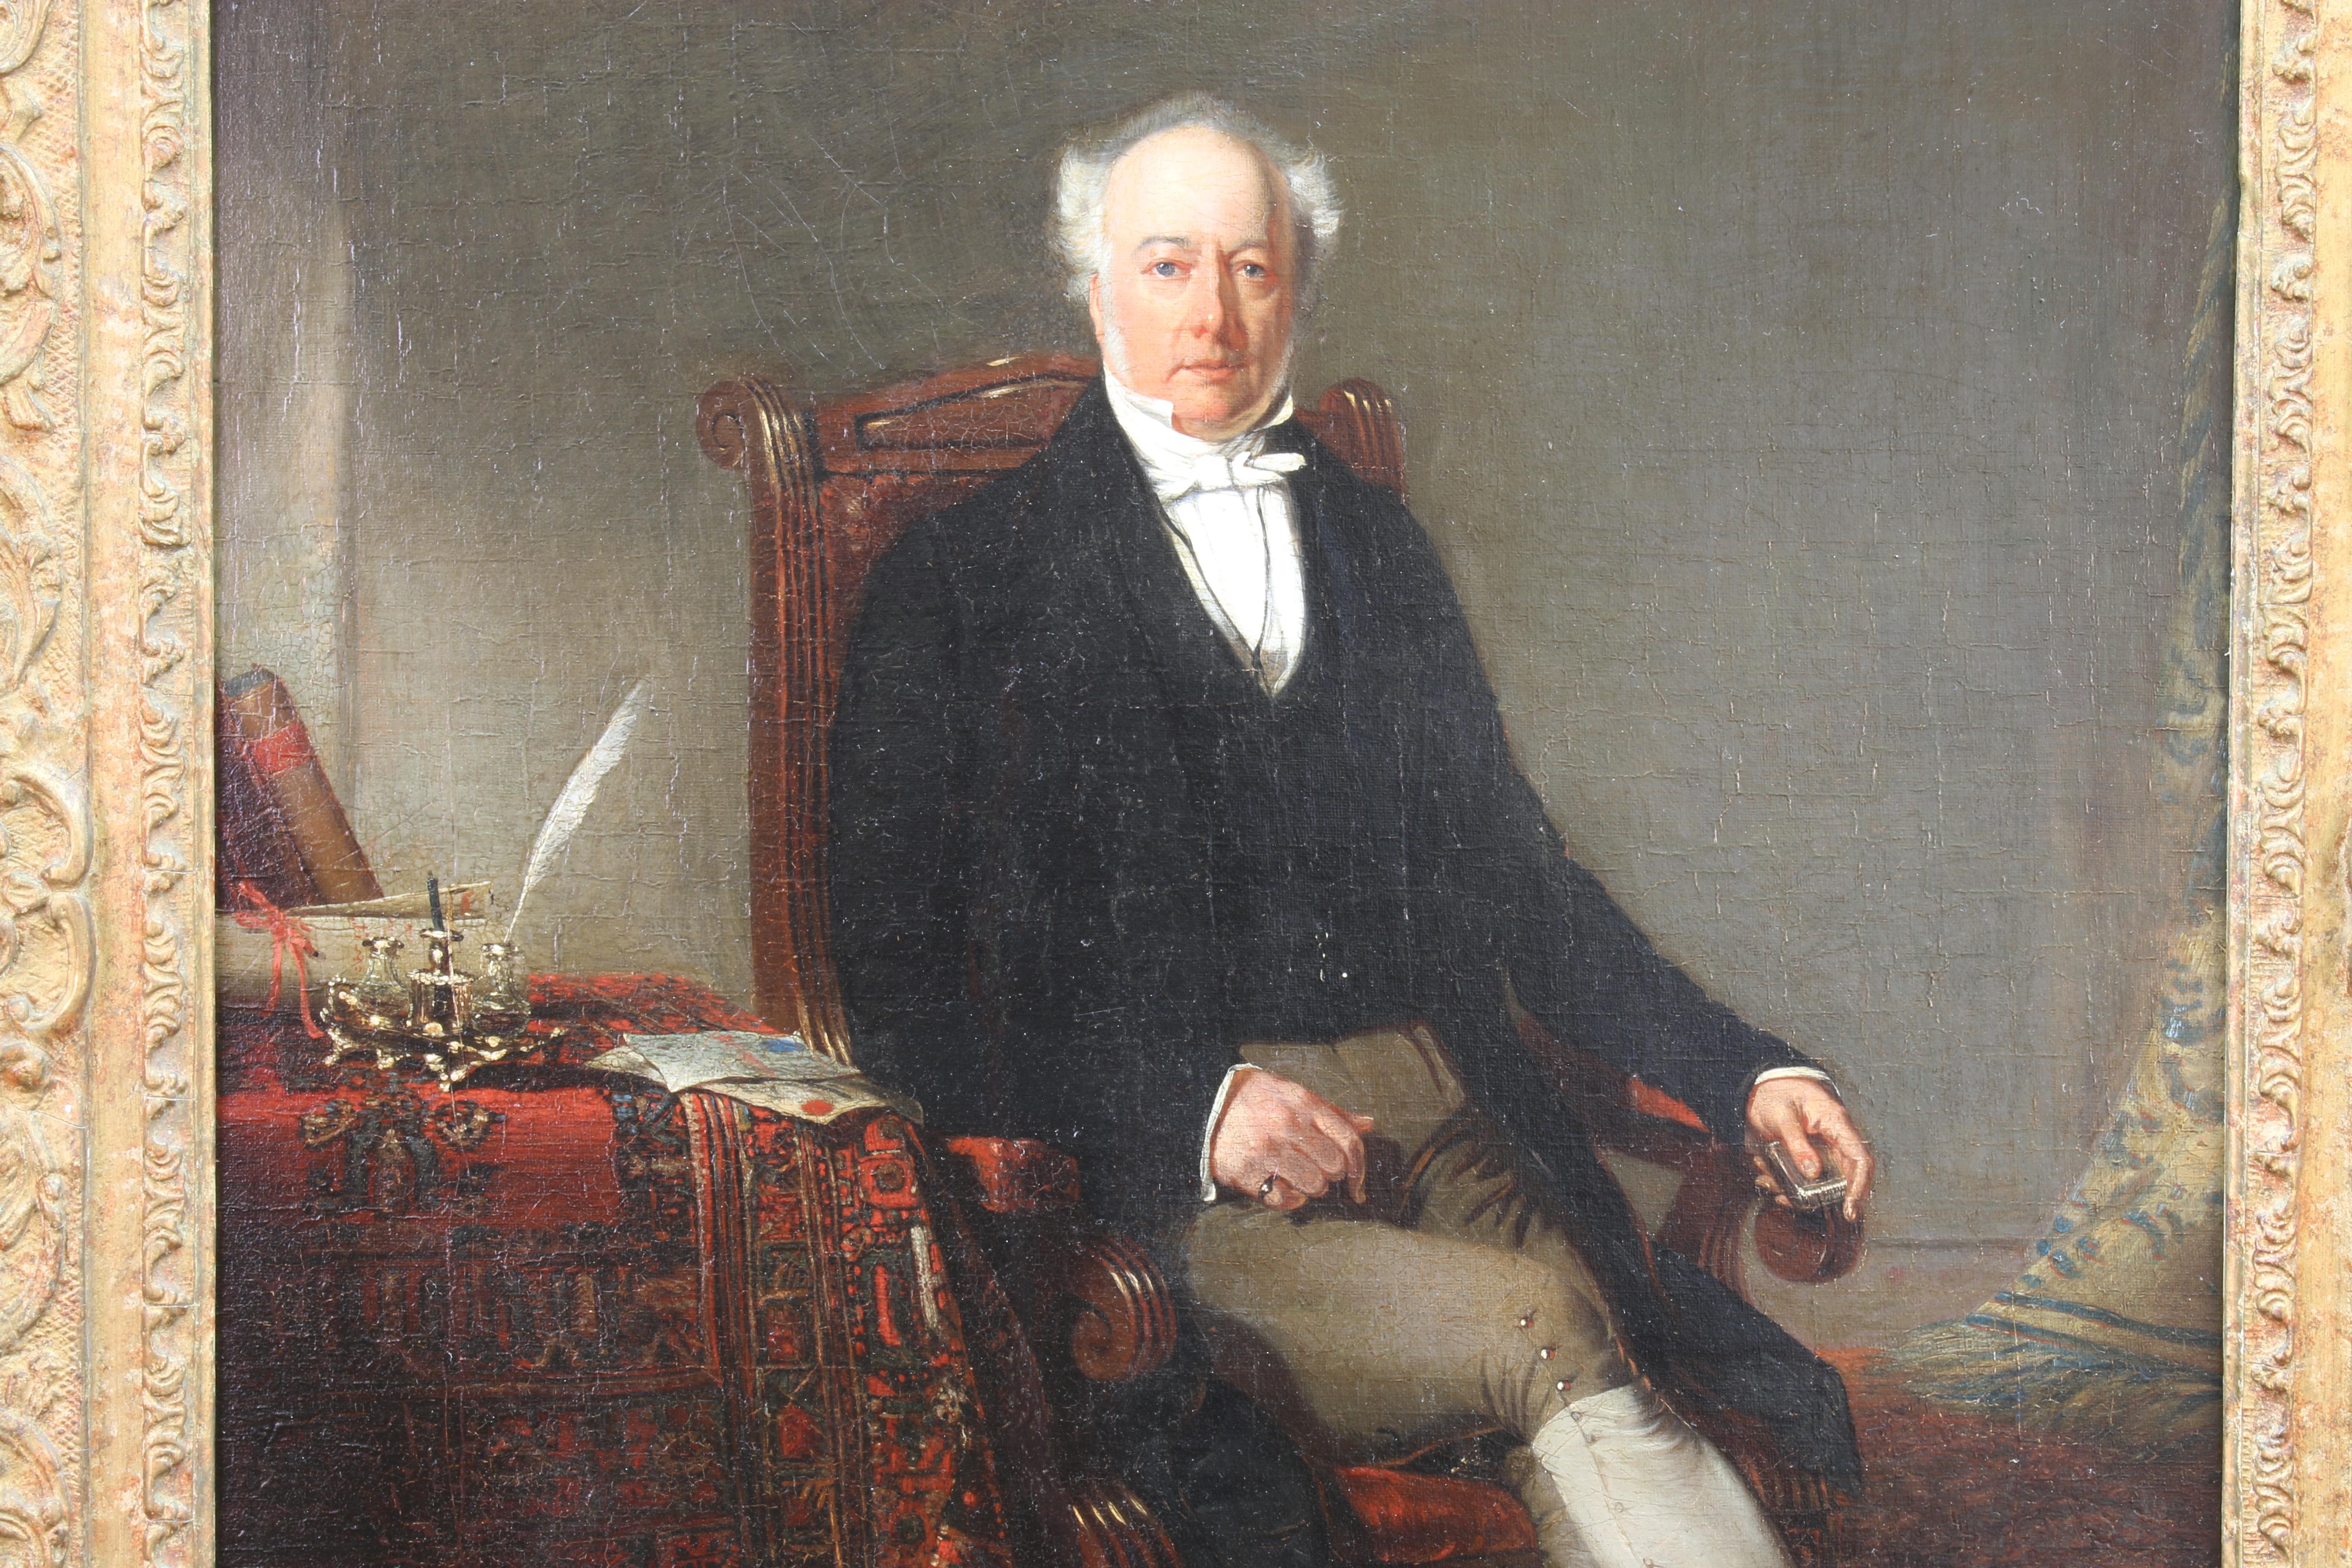 Charles Grey, 2nd Earl Grey, former Prime Minister of the United Kingdom - Black Portrait Painting by Phillip Westcott